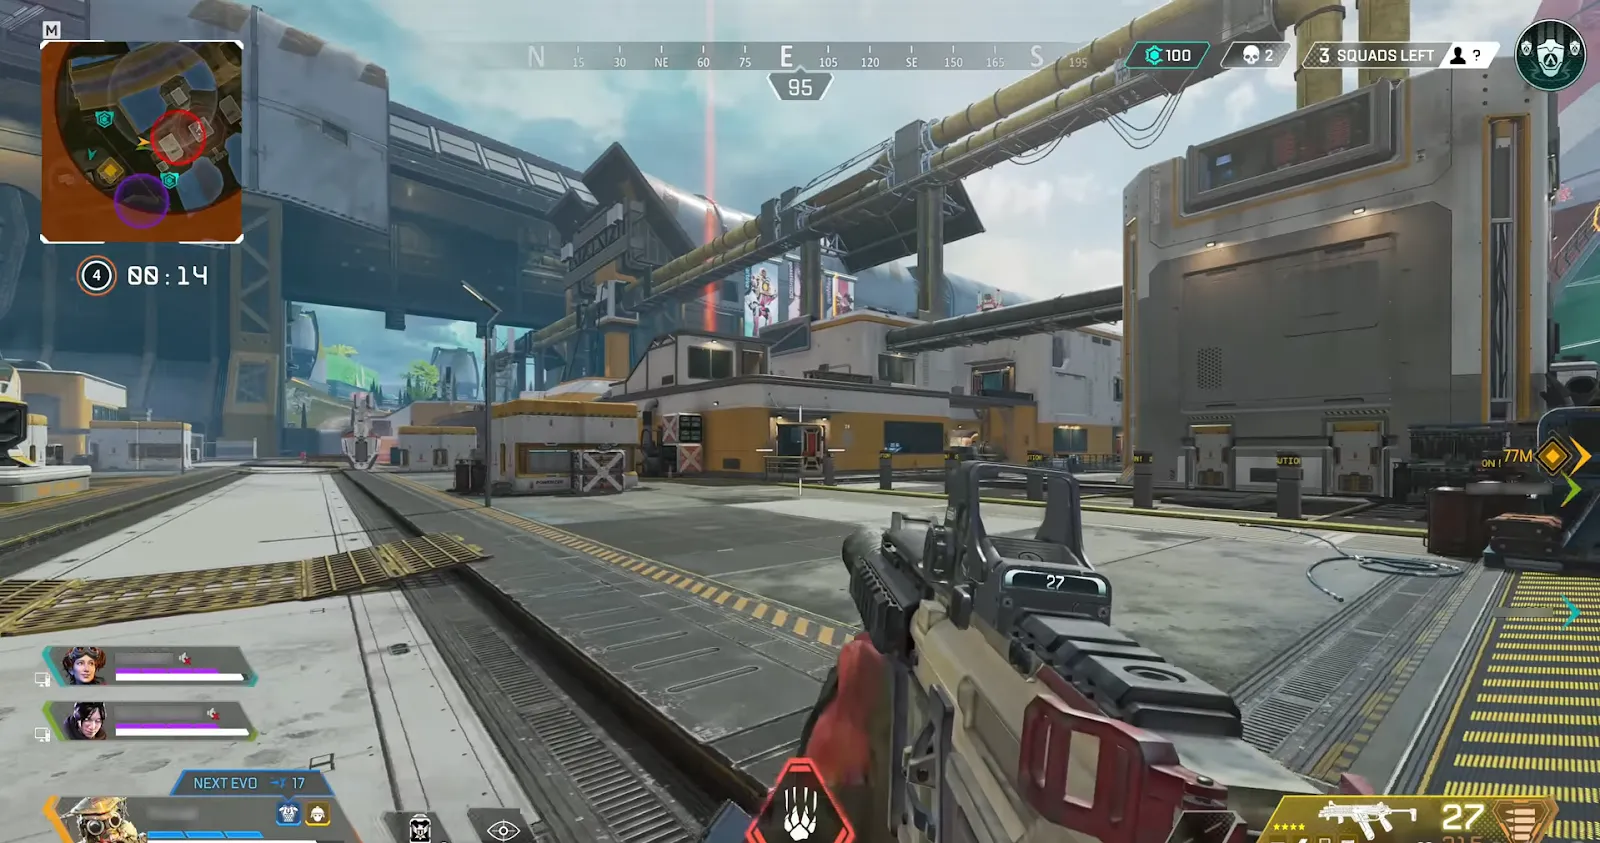 Just because you can run Apex Legends on 60+ FPS, doesn't mean you'll be able to record it that smoothly.